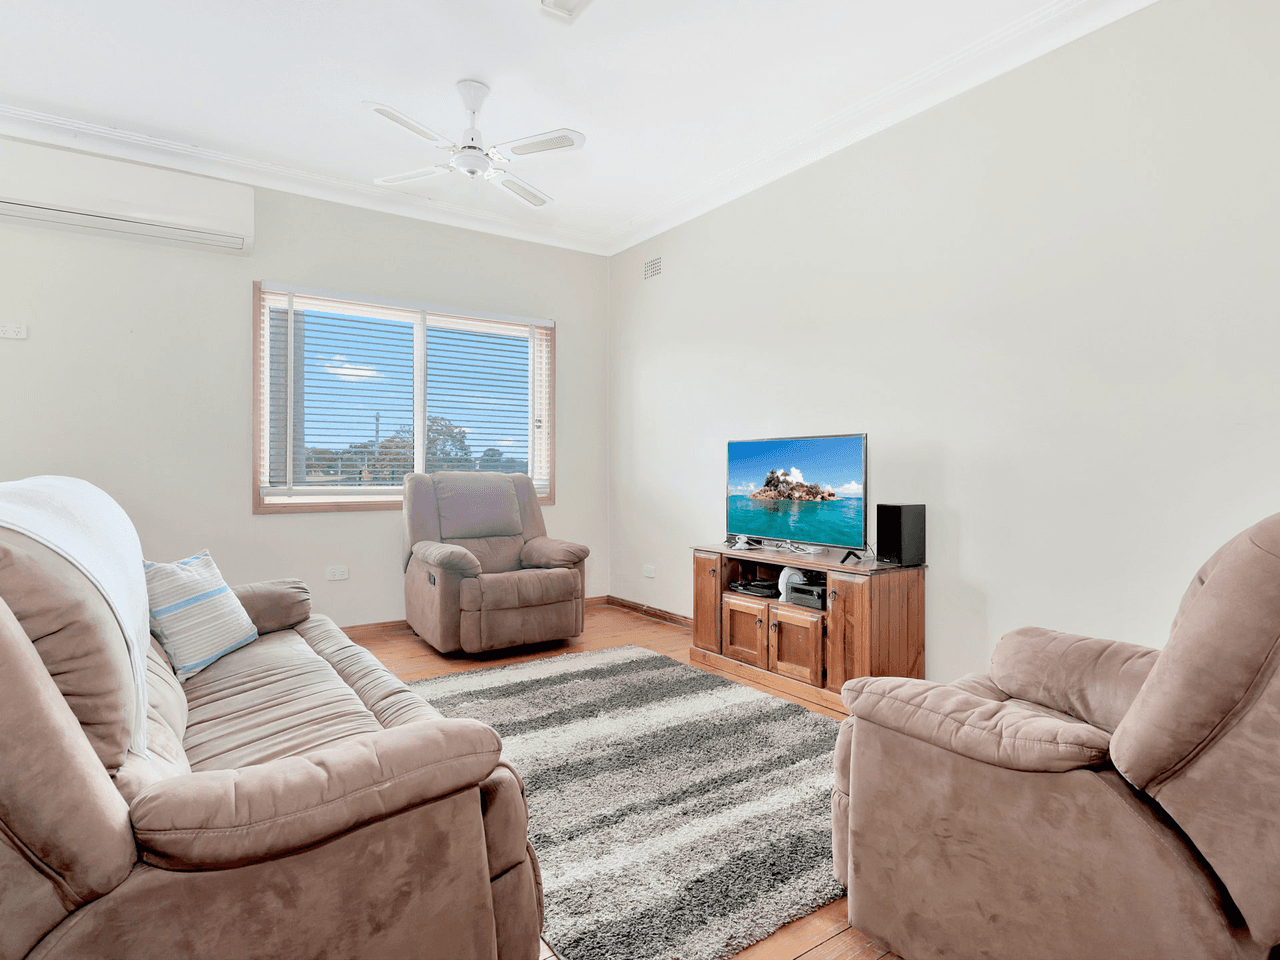 10 Lucy St, KINGSWOOD, NSW 2747